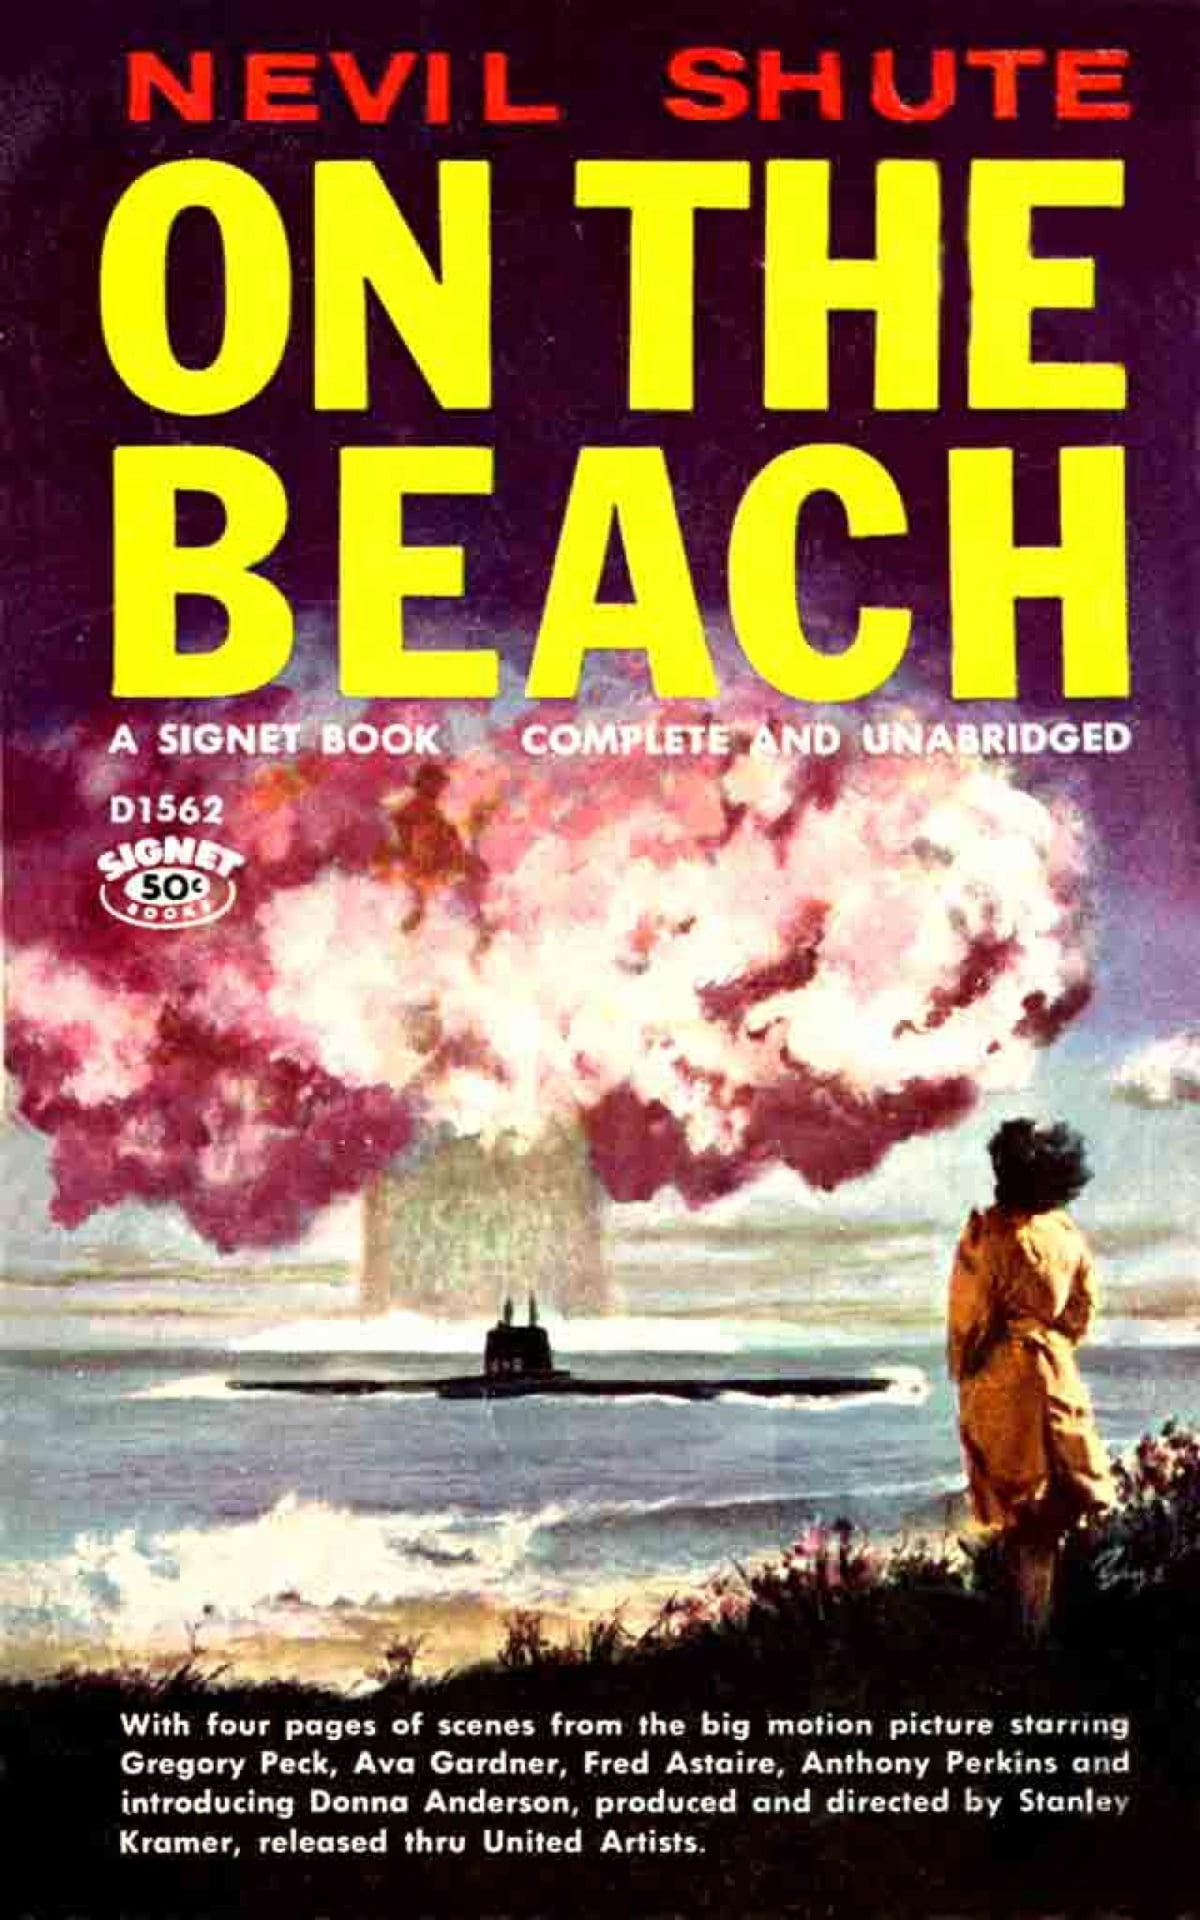 Surviving the Apocalypse: A Deep Dive into “On the Beach” by Nevil Shute